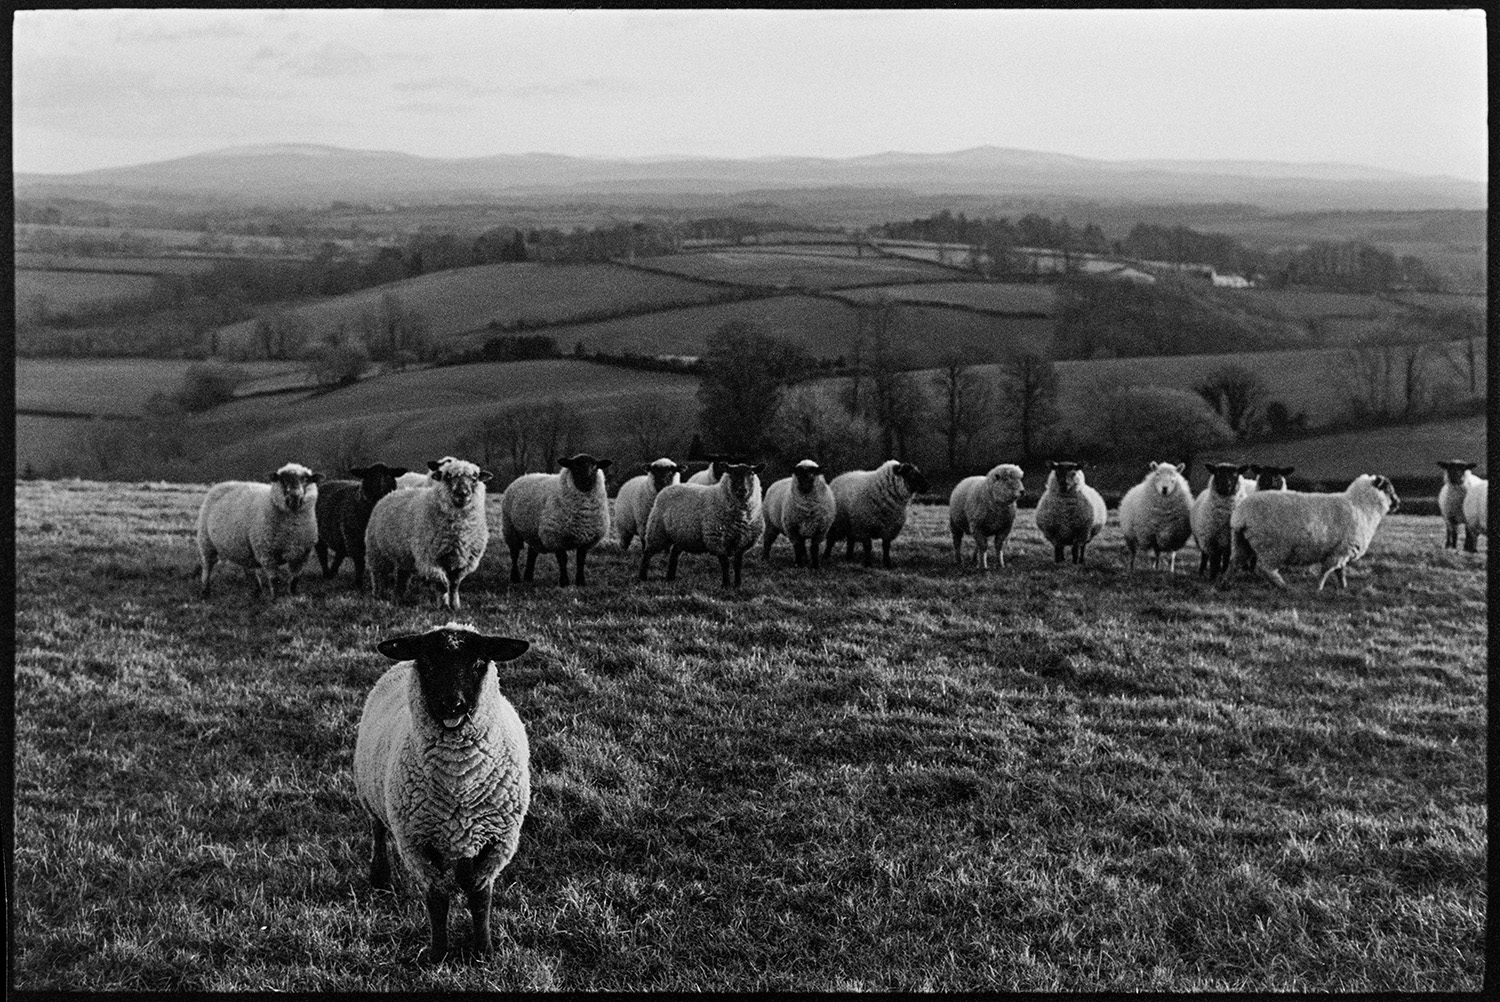 Sheep on hillside, evening. 
[Sheep in a field on a hillside, in the evening, at Berry, Iddesleigh. A landscape of fields, trees and hedges can be seen in the background.]